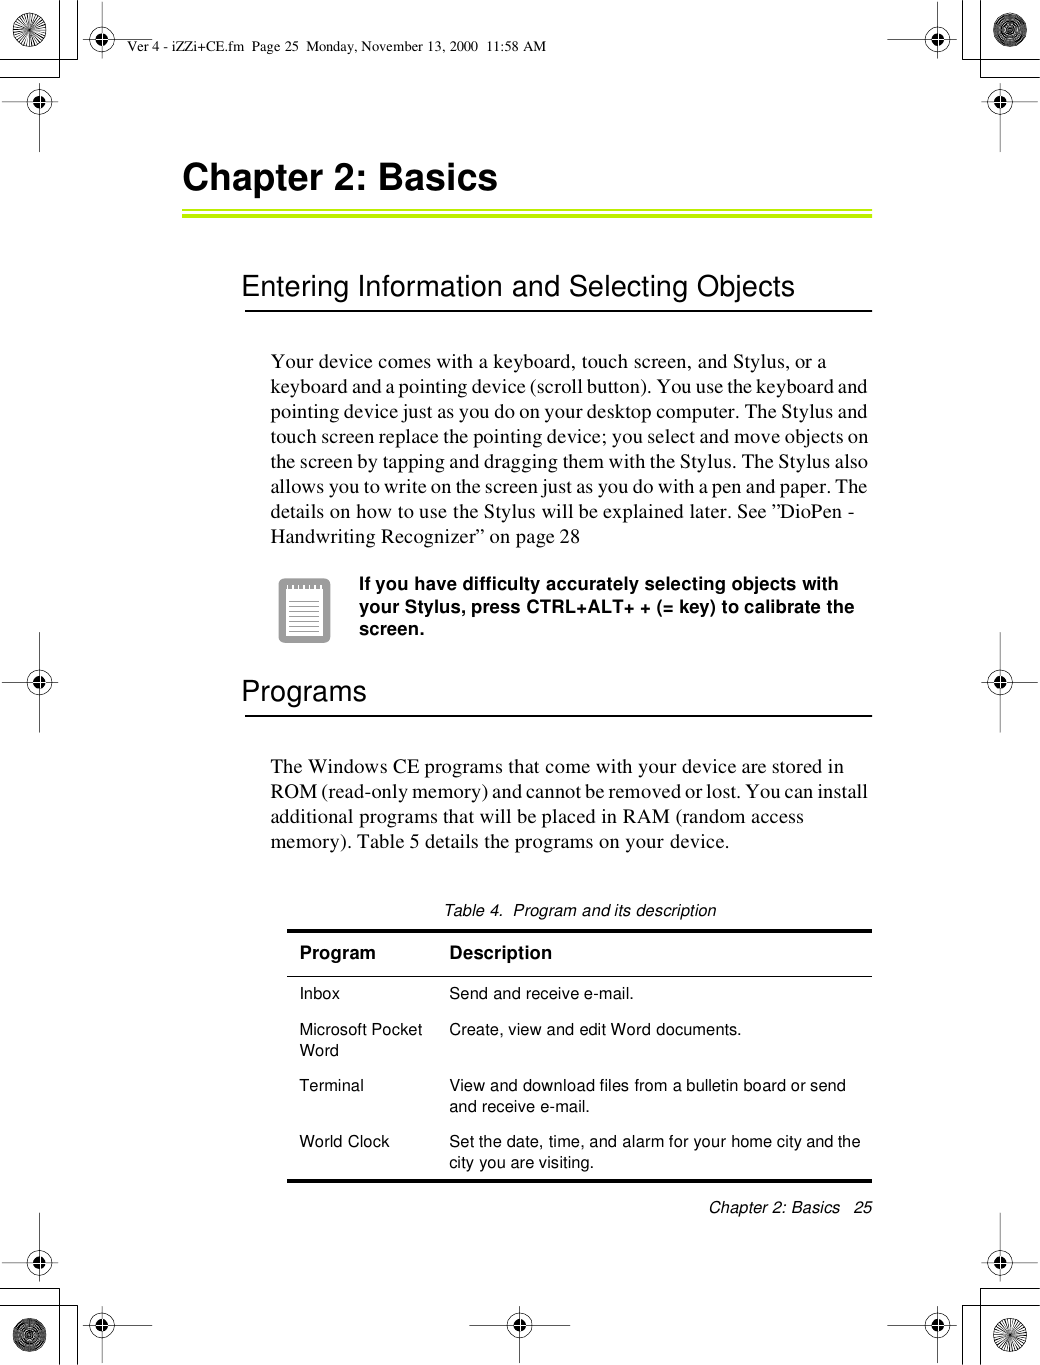 Chapter 2:Basics25Chapter 2:BasicsEntering Information and Selecting ObjectsYour device comes with a keyboard, touch screen, and Stylus, or akeyboard and a pointing device (scroll button). You use the keyboard andpointing device just as you do on your desktop computer. The Stylus andtouch screen replace the pointing device; you select and move objects onthe screen by tapping and dragging them with the Stylus. The Stylus alsoallows you to write on the screen just as you do with a pen and paper. Thedetails on how to use the Stylus will be explained later. See ”DioPen -Handwriting Recognizer” on page 28If you have difficulty accurately selecting objects withyour Stylus, press CTRL+ALT+ + (= key)to calibrate thescreen.ProgramsThe Windows CE programs that come with your device are stored inROM (read-only memory) and cannot be removed or lost. You can installadditional programs that will be placed in RAM (random accessmemory). Table 5 details the programs on your device.Table4. Program anditsdescriptionProgram DescriptionInbox Send and receive e-mail.Microsoft PocketWordCreate, view and edit Word documents.Terminal View and download files from a bulletin board or sendand receive e-mail.World Clock Set the date, time, and alarm for your home city and thecity you are visiting.Ver 4 - iZZi+CE.fm Page 25 Monday, November 13, 2000 11:58 AM